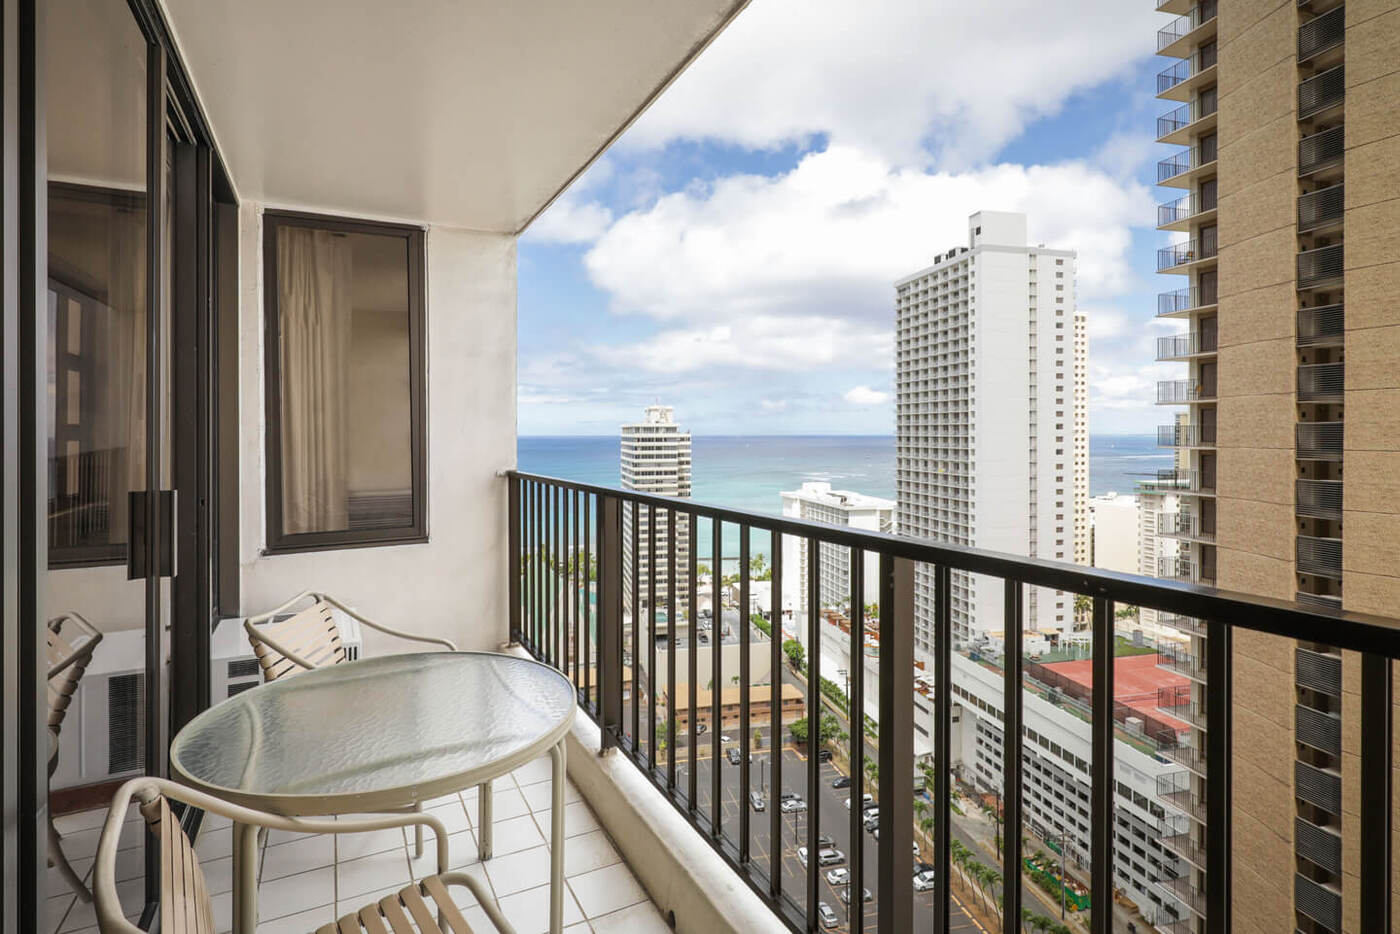 1-Bedroom Partial Ocean View with private balcony.